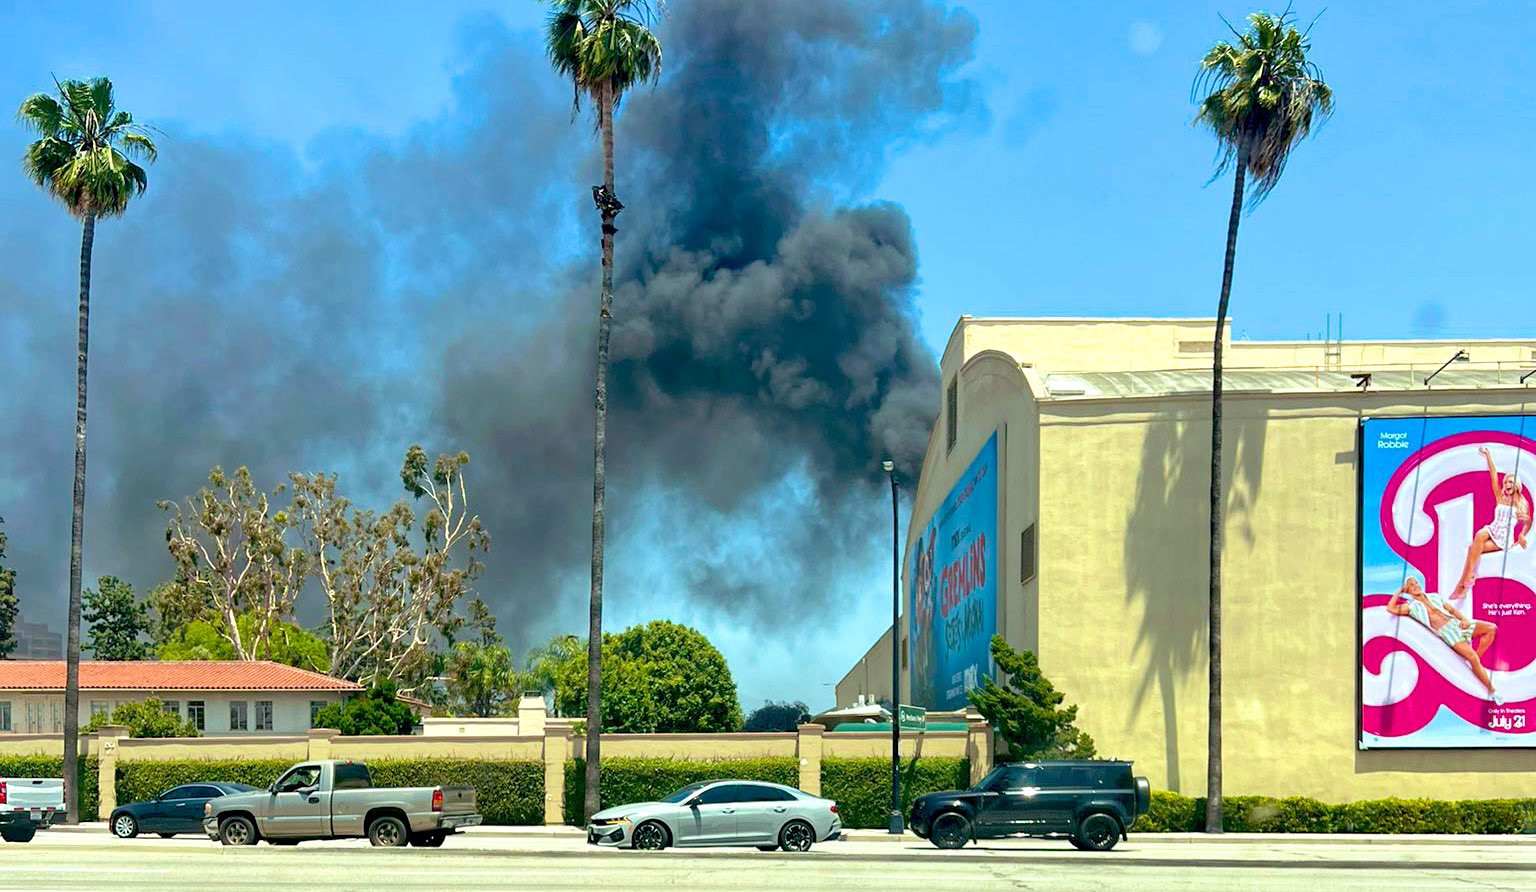 A fire broke out at the Warner Bros. lot